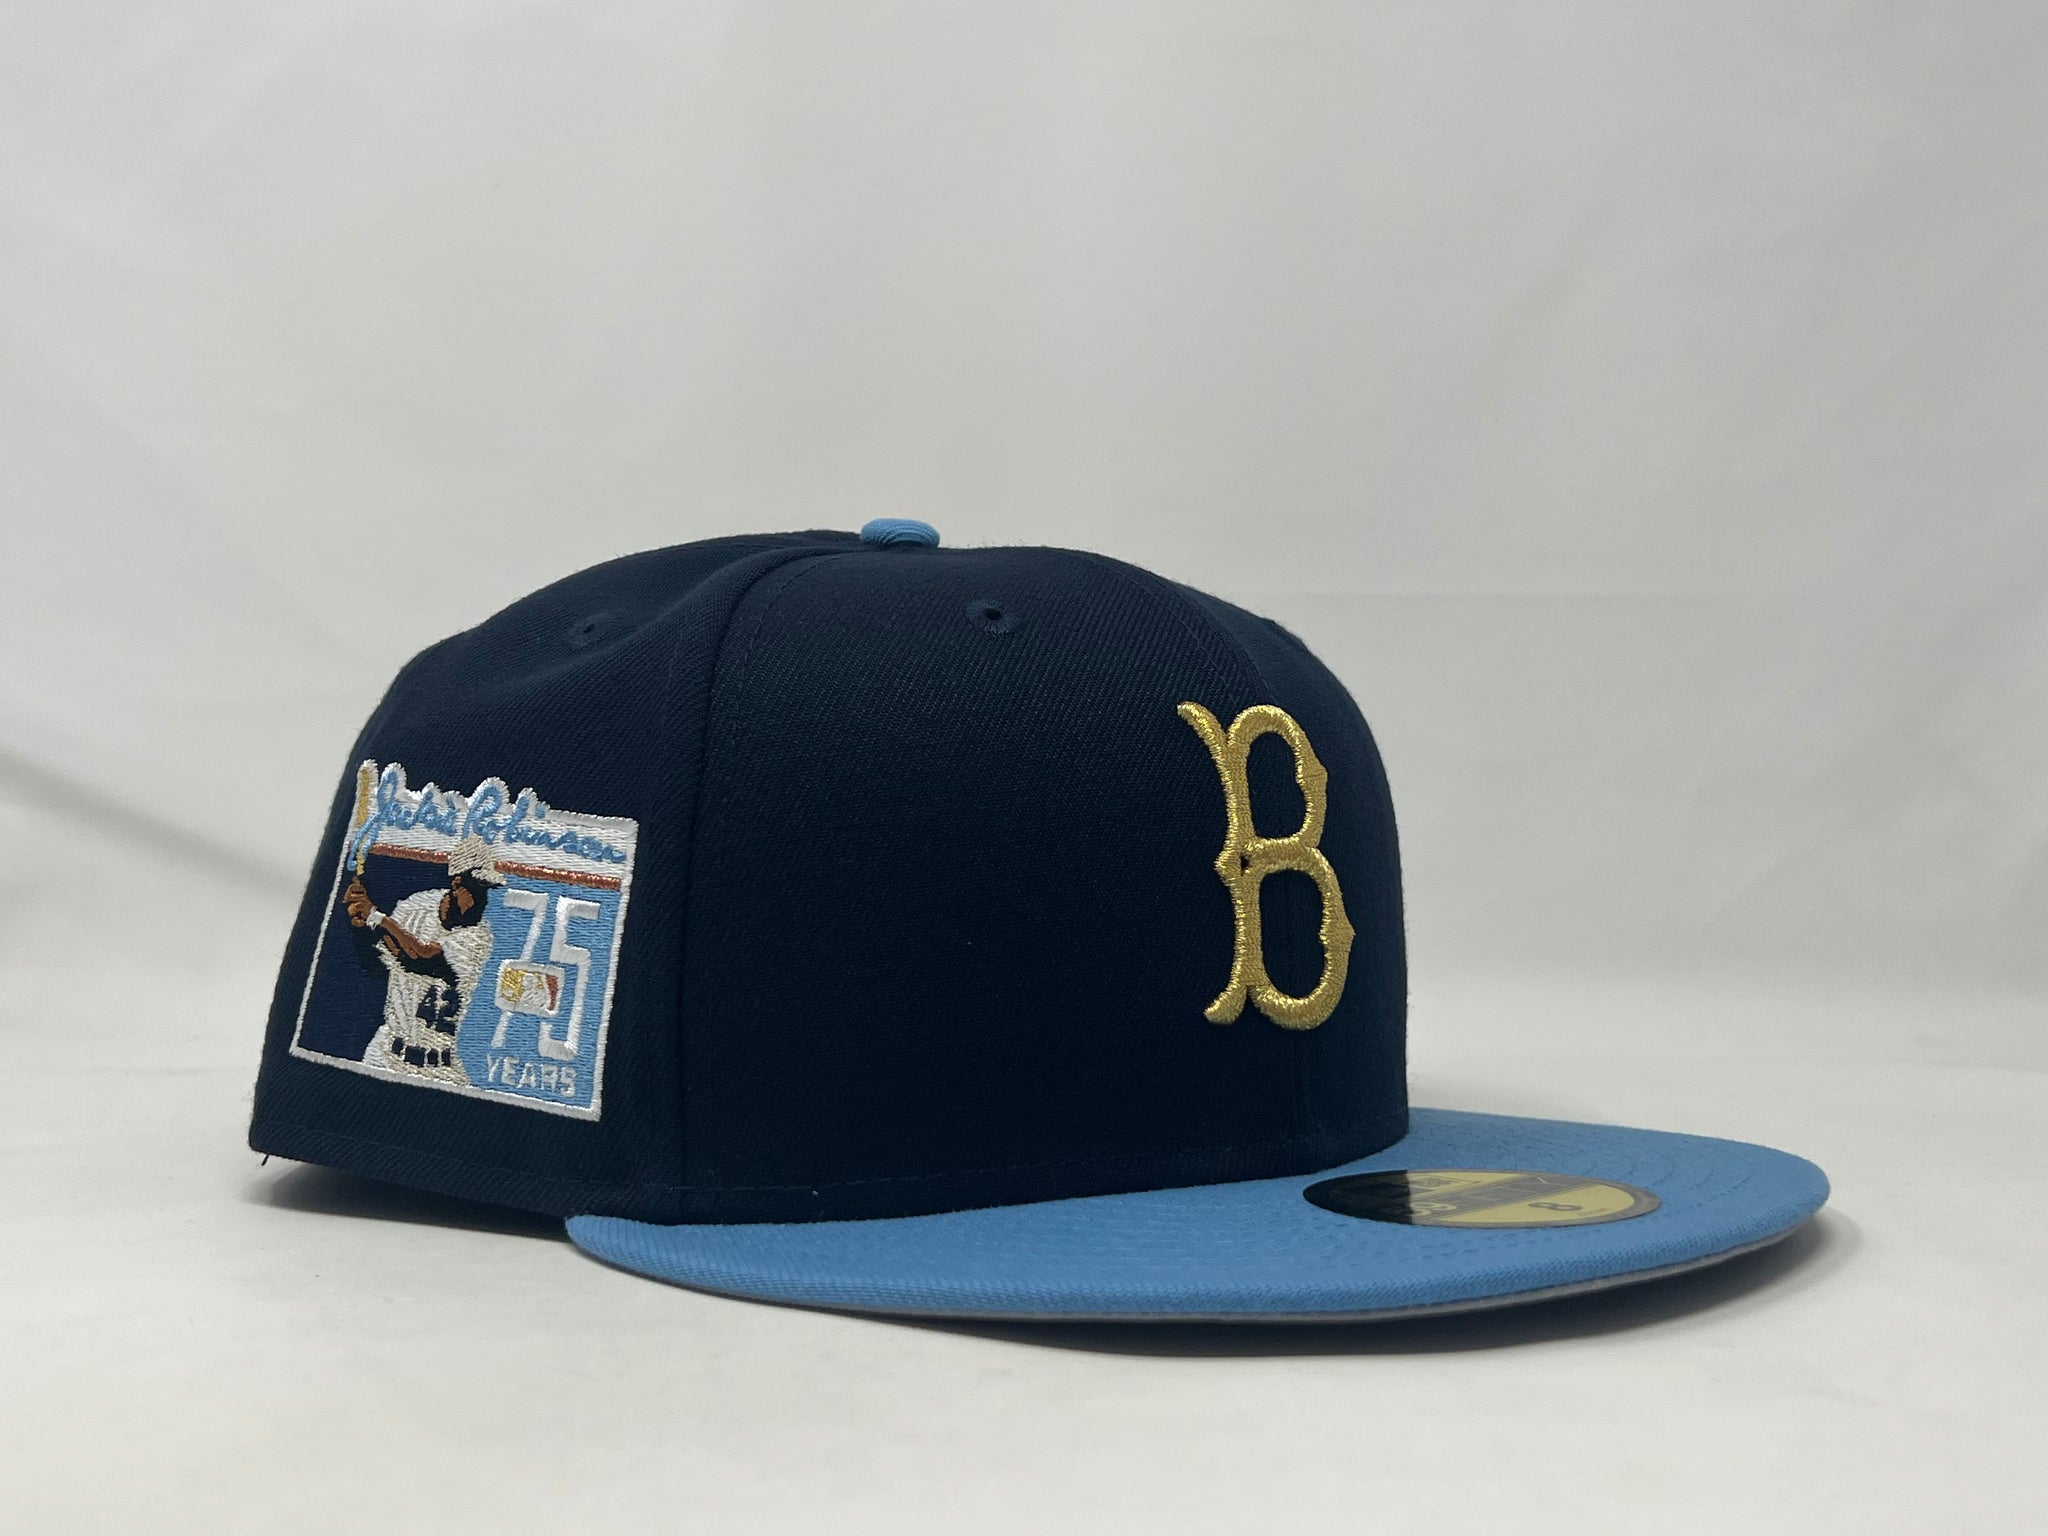 BROOKLYN DODGERS NEW ERA 59FIFTY JACKIE ROBINSON PATCH PINSTRIPE FITTED HAT  NWT